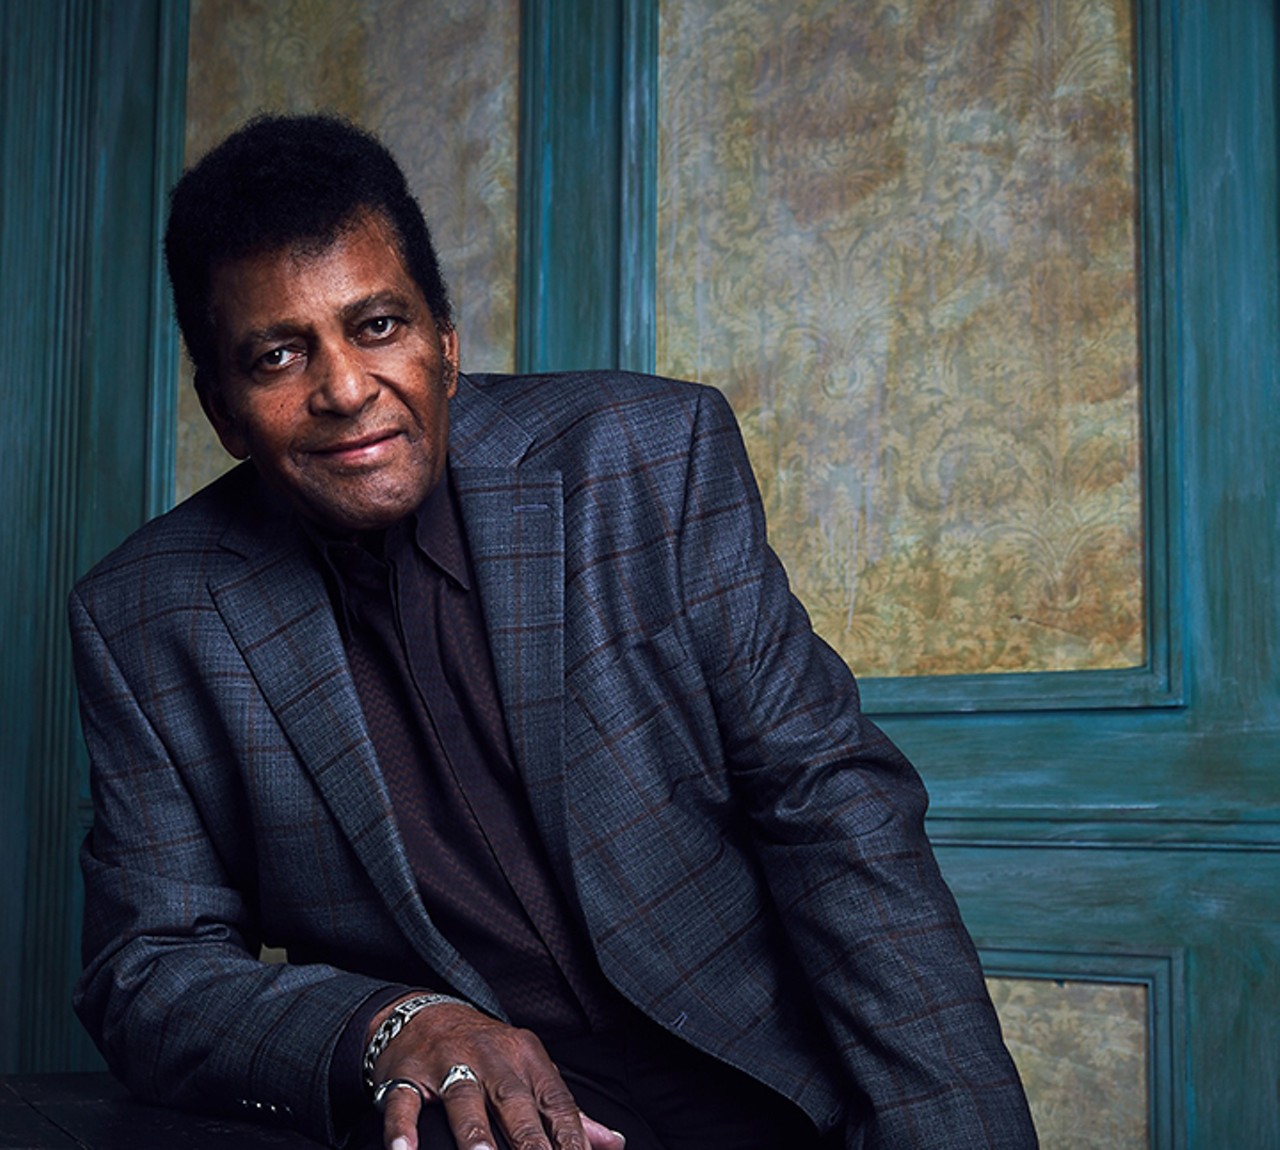 Friday, Oct. 19Charley Pride at the Sharon L. Morse Performing Arts Center, The Villages